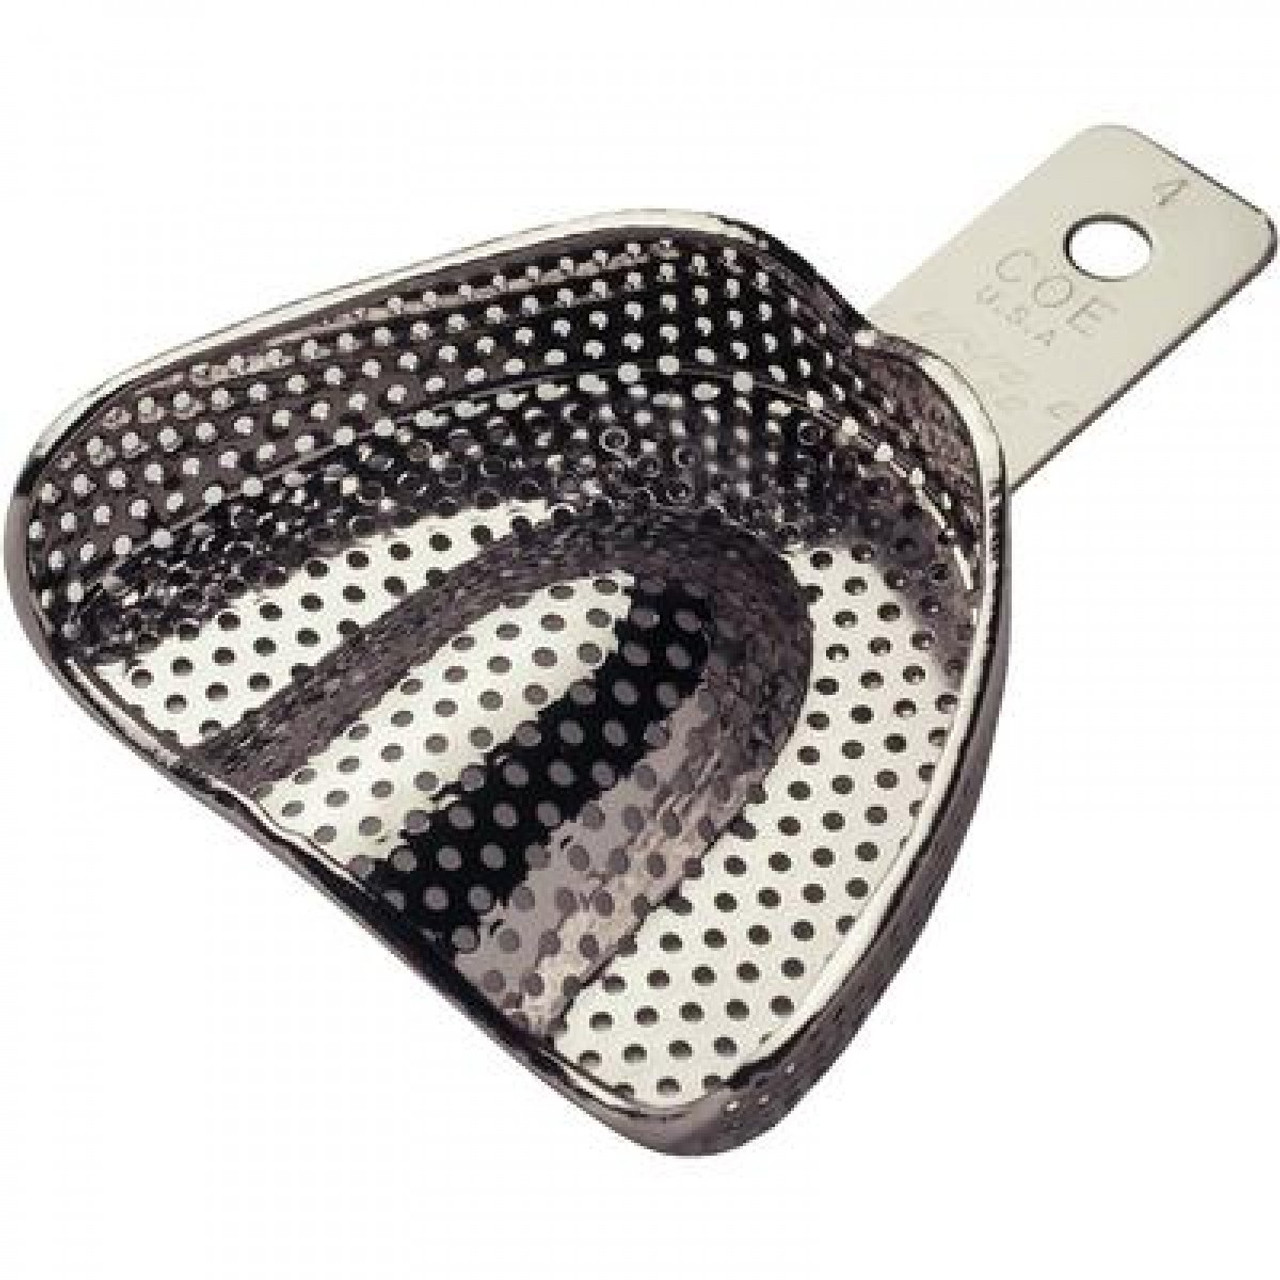 GC America - Stainless Steel, Regular Perforated Tray - Tray #S20 Individual Perforated Lowers (Large)